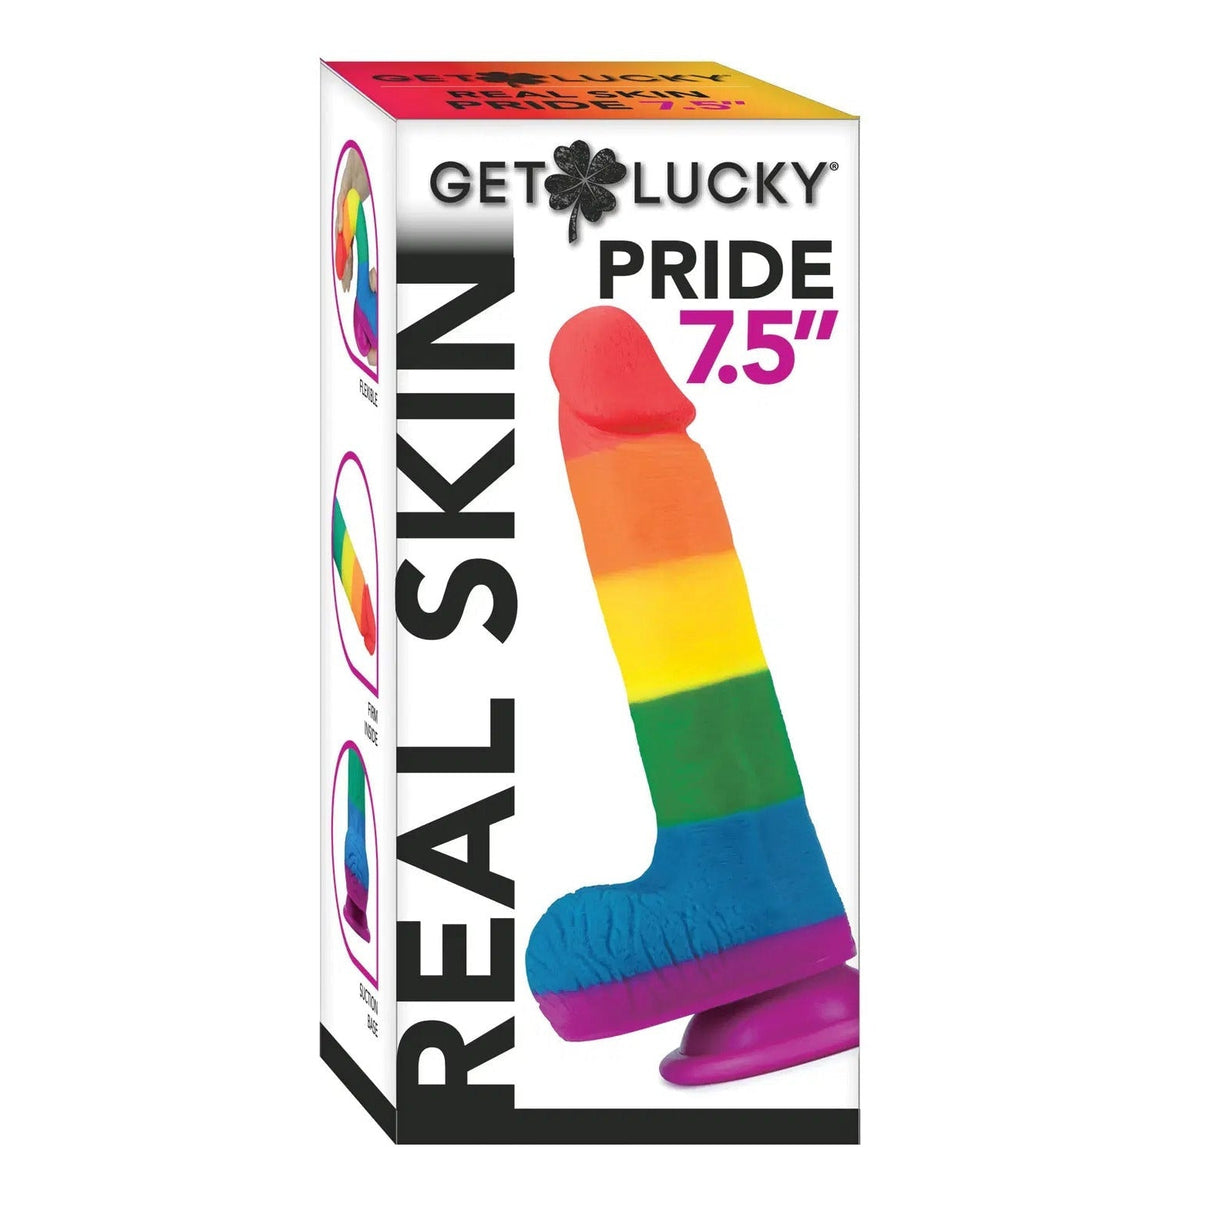 Get Lucky Real Skin 7.5 Inch Pride Dildo